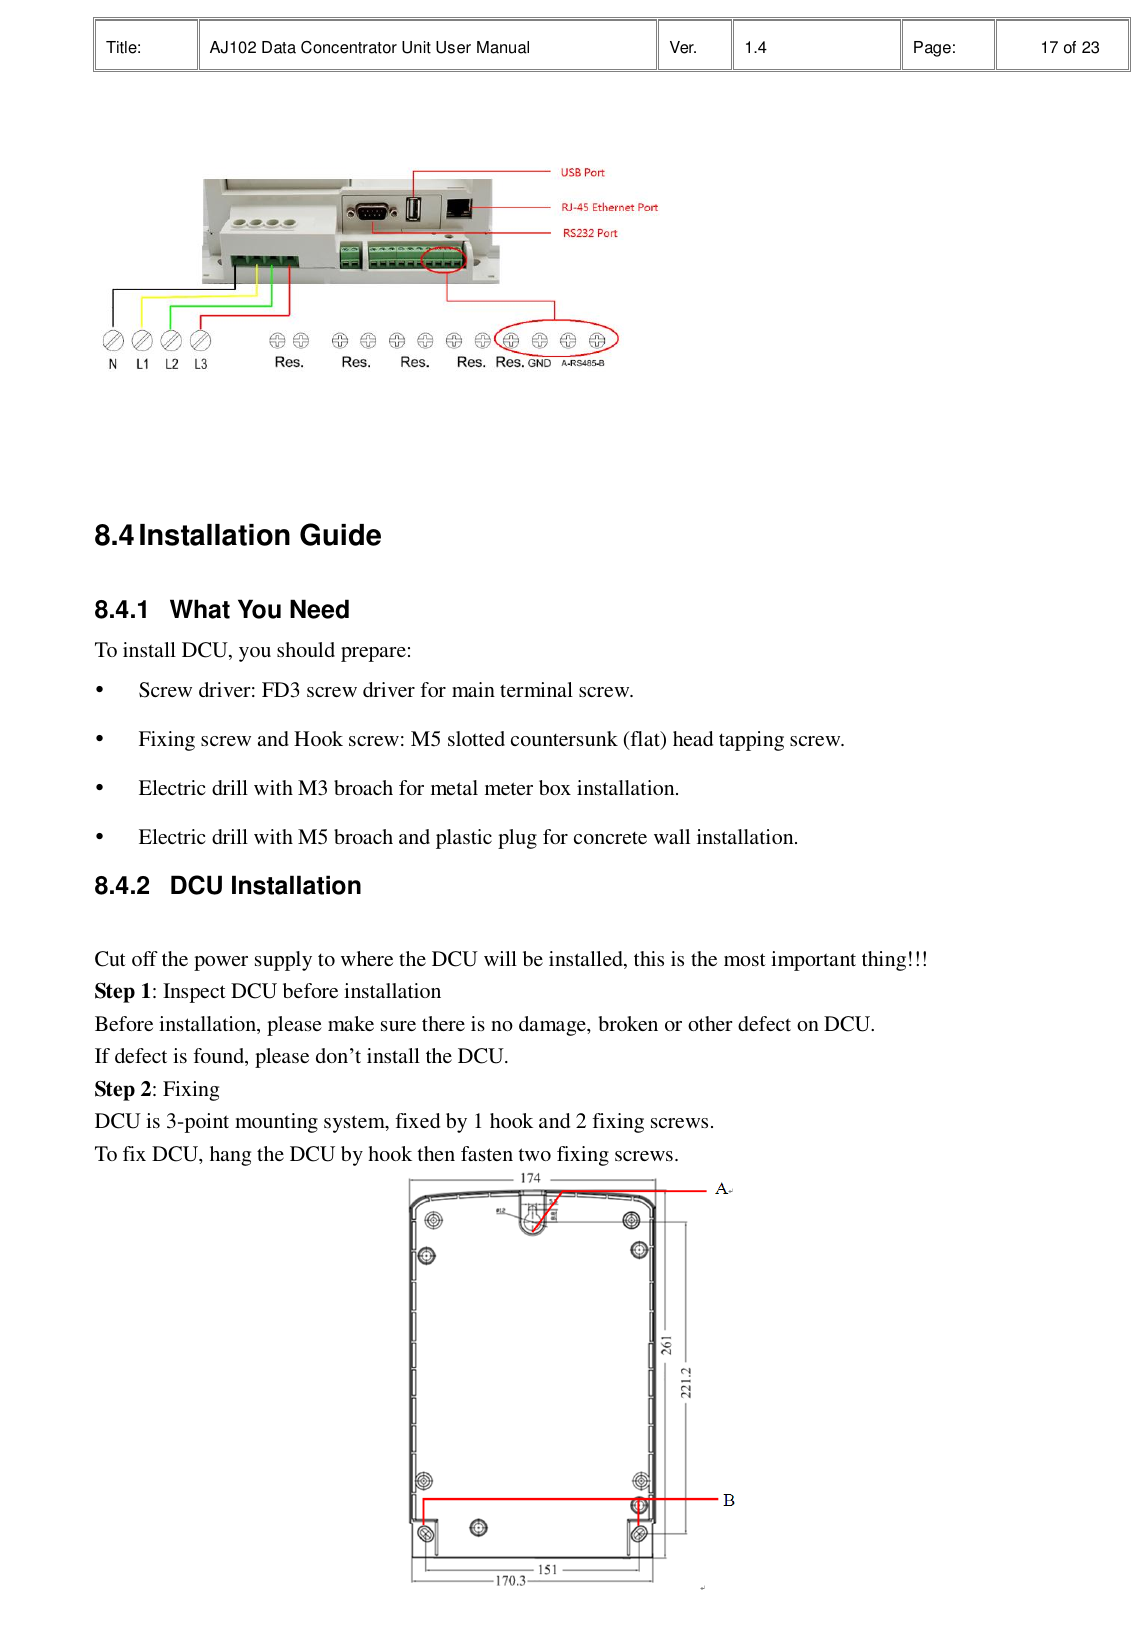 Title: AJ102 Data Concentrator Unit User Manual Ver. 1.4 Page:   17 of 23   8.4 Installation Guide 8.4.1  What You Need To install DCU, you should prepare:  Screw driver: FD3 screw driver for main terminal screw.  Fixing screw and Hook screw: M5 slotted countersunk (flat) head tapping screw.  Electric drill with M3 broach for metal meter box installation.  Electric drill with M5 broach and plastic plug for concrete wall installation. 8.4.2  DCU Installation  Cut off the power supply to where the DCU will be installed, this is the most important thing!!! Step 1: Inspect DCU before installation Before installation, please make sure there is no damage, broken or other defect on DCU.   If defect is found, please don’t install the DCU. Step 2: Fixing DCU is 3-point mounting system, fixed by 1 hook and 2 fixing screws.   To fix DCU, hang the DCU by hook then fasten two fixing screws.  